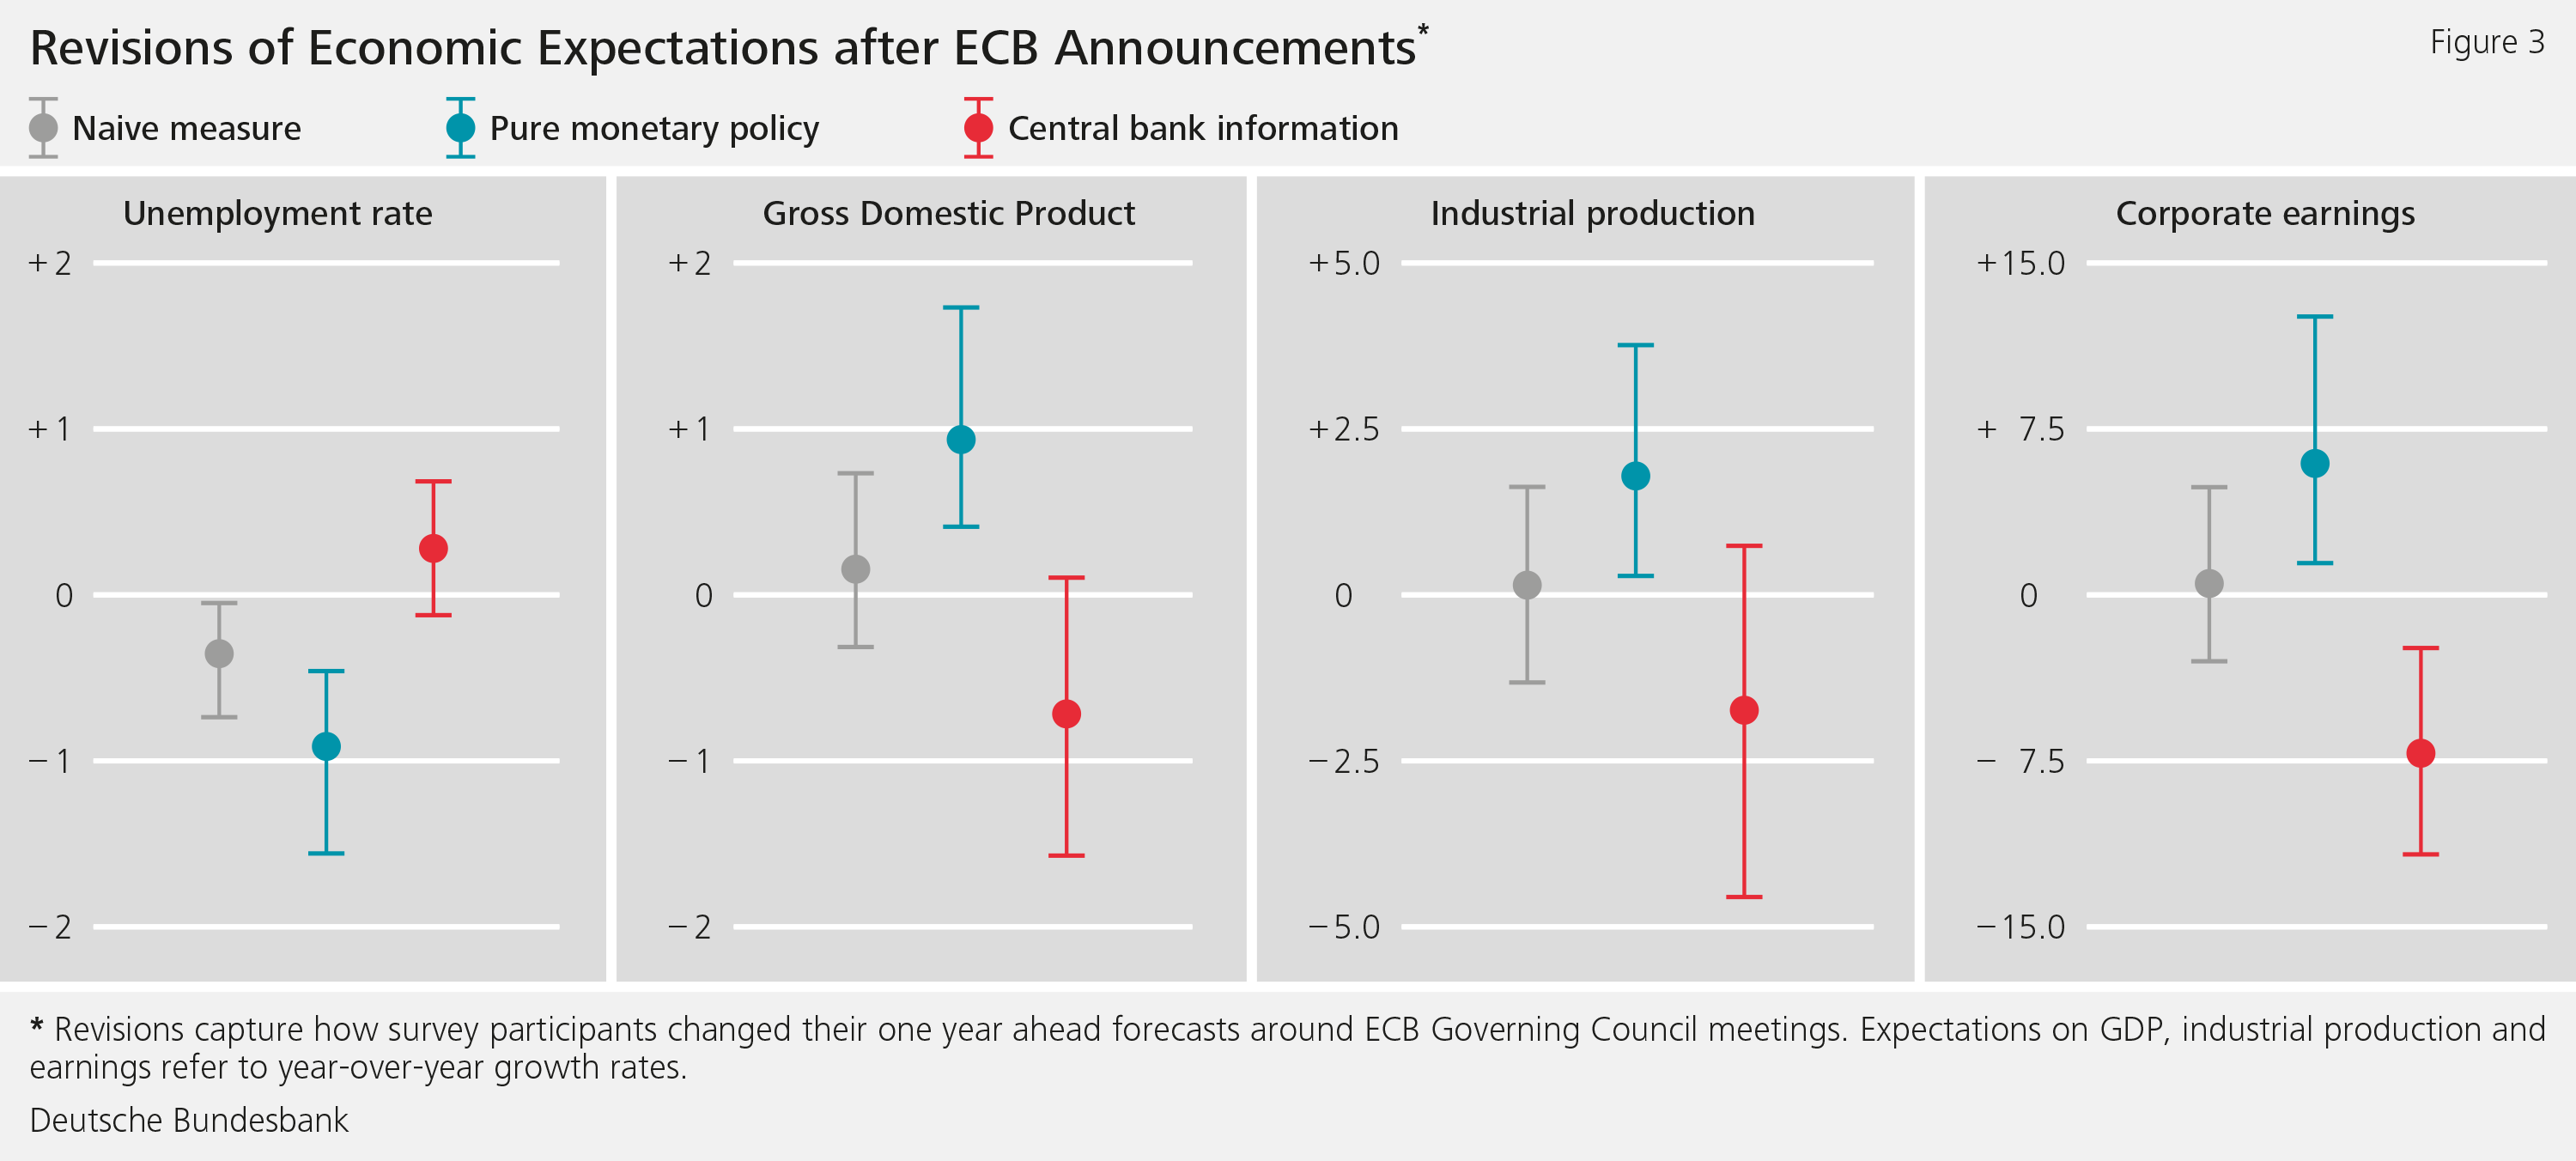 Figure 3: Revisions of Economic Expectations after ECB Announcements